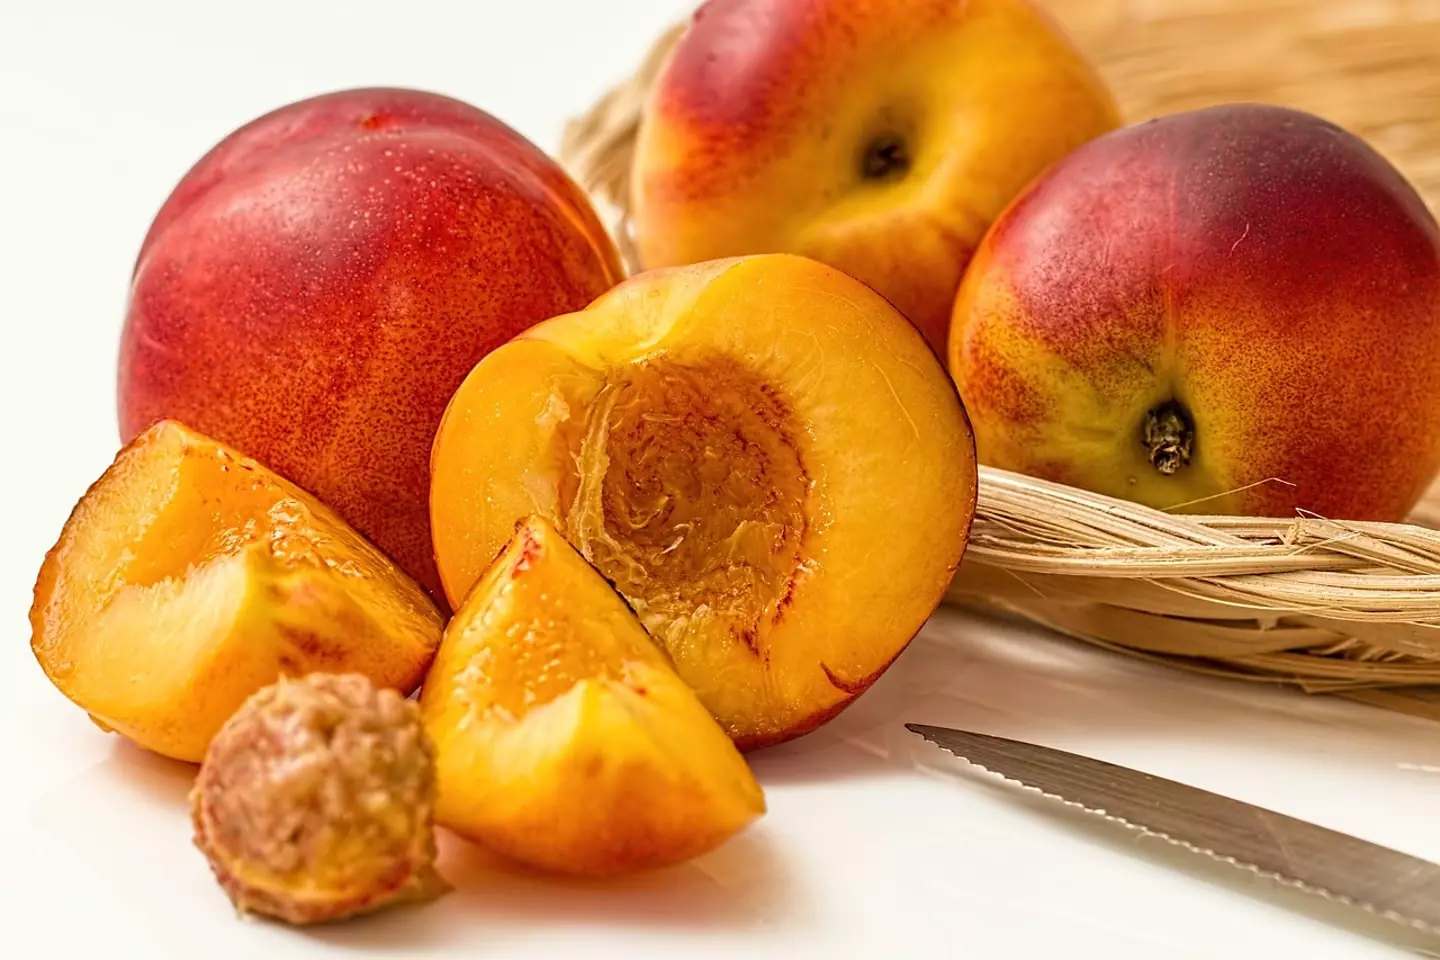 Peaches are characterised as drupes because of their fleshing layer an shell.